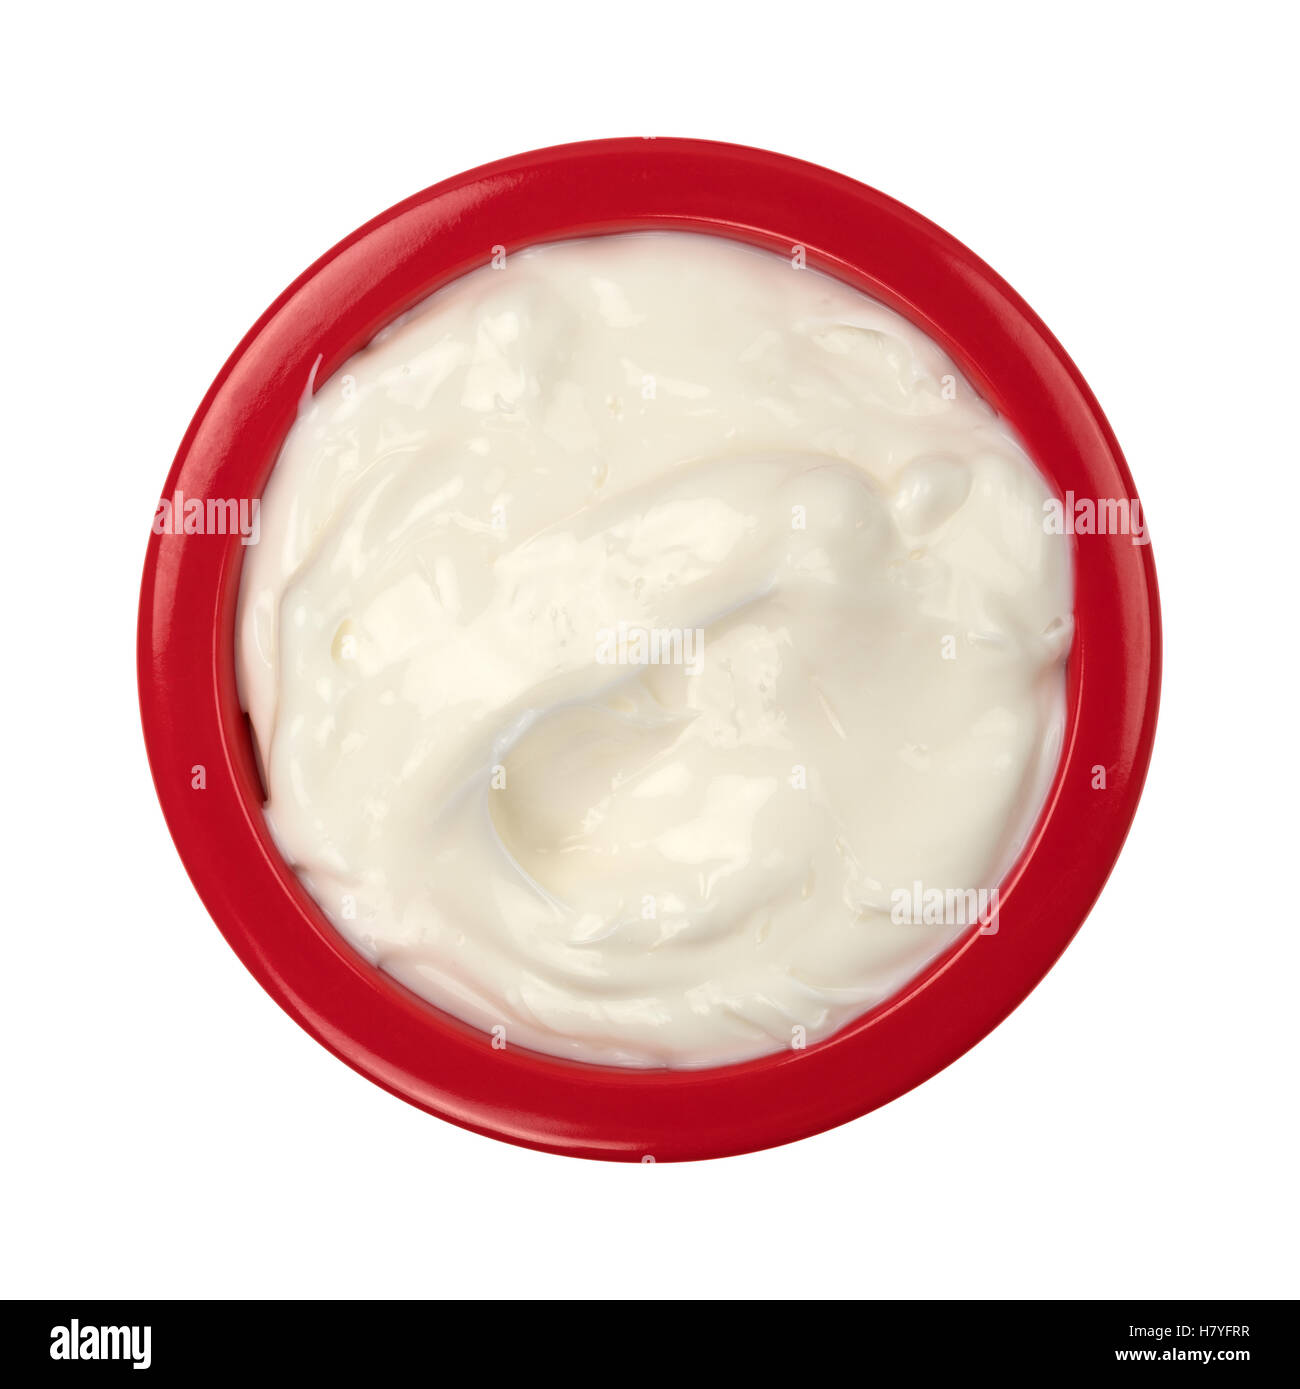 Top view of a red bowl filled with cocoa butter cream skin lotion isolated on a white background. Stock Photo